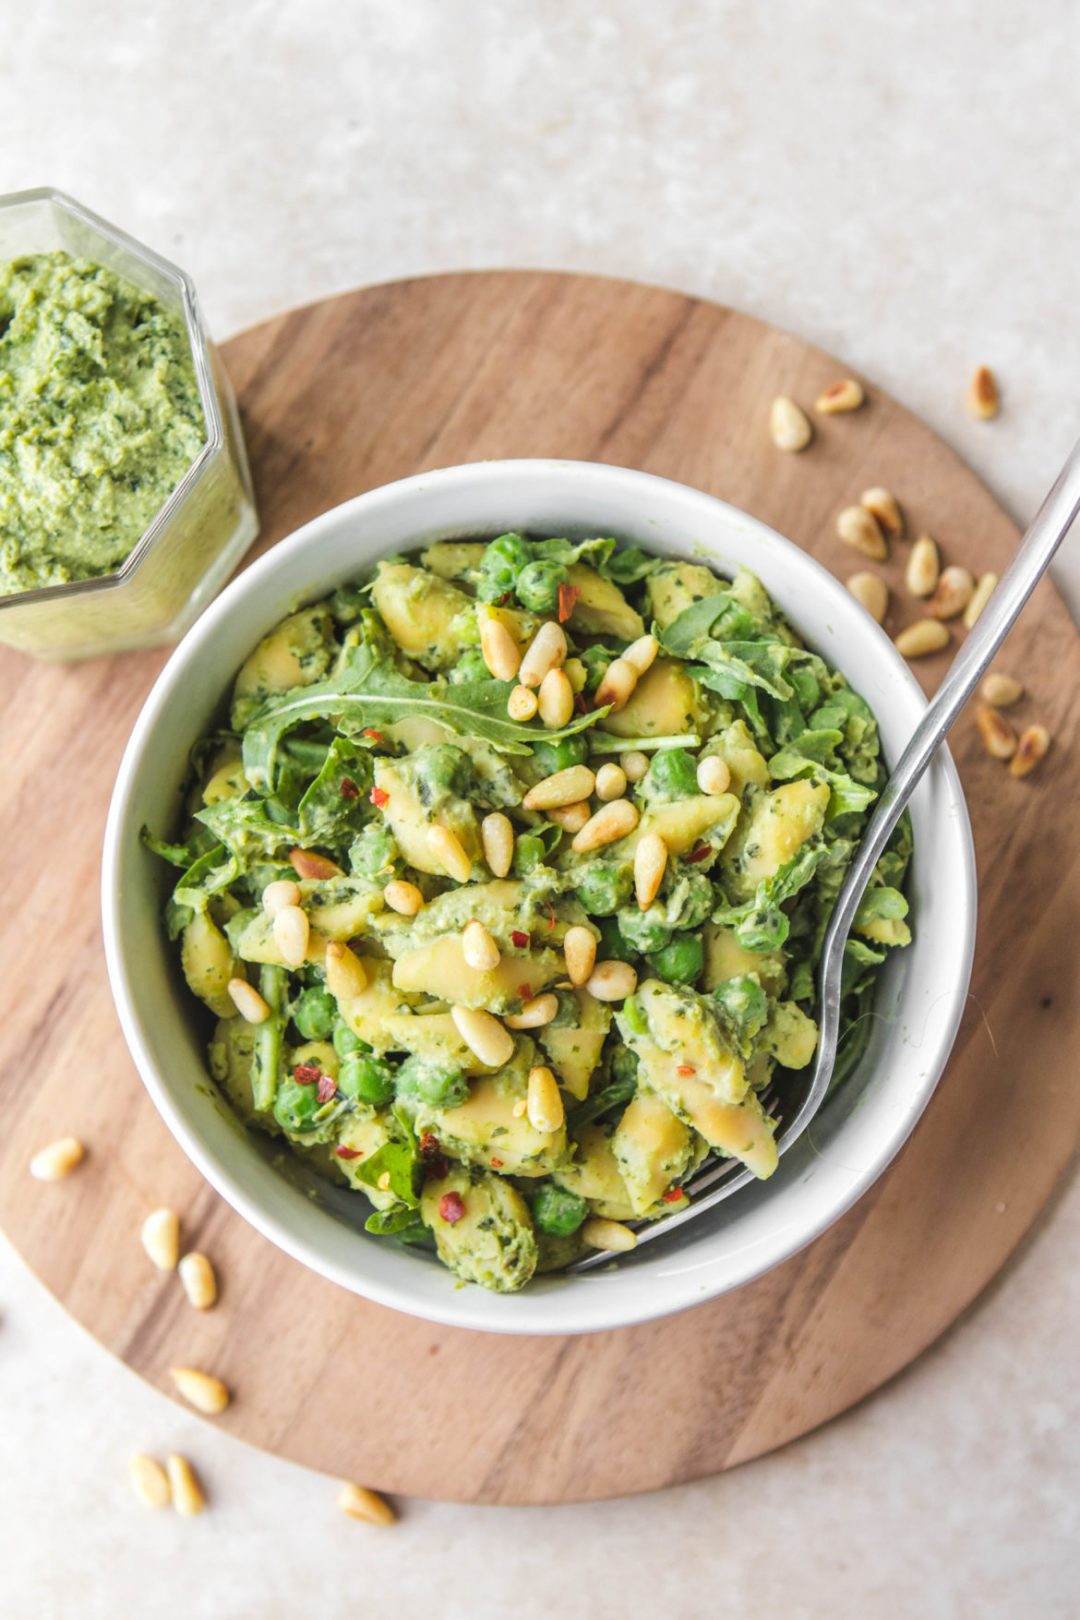 Pea Pesto Pasta in a bowl on a wooden surface